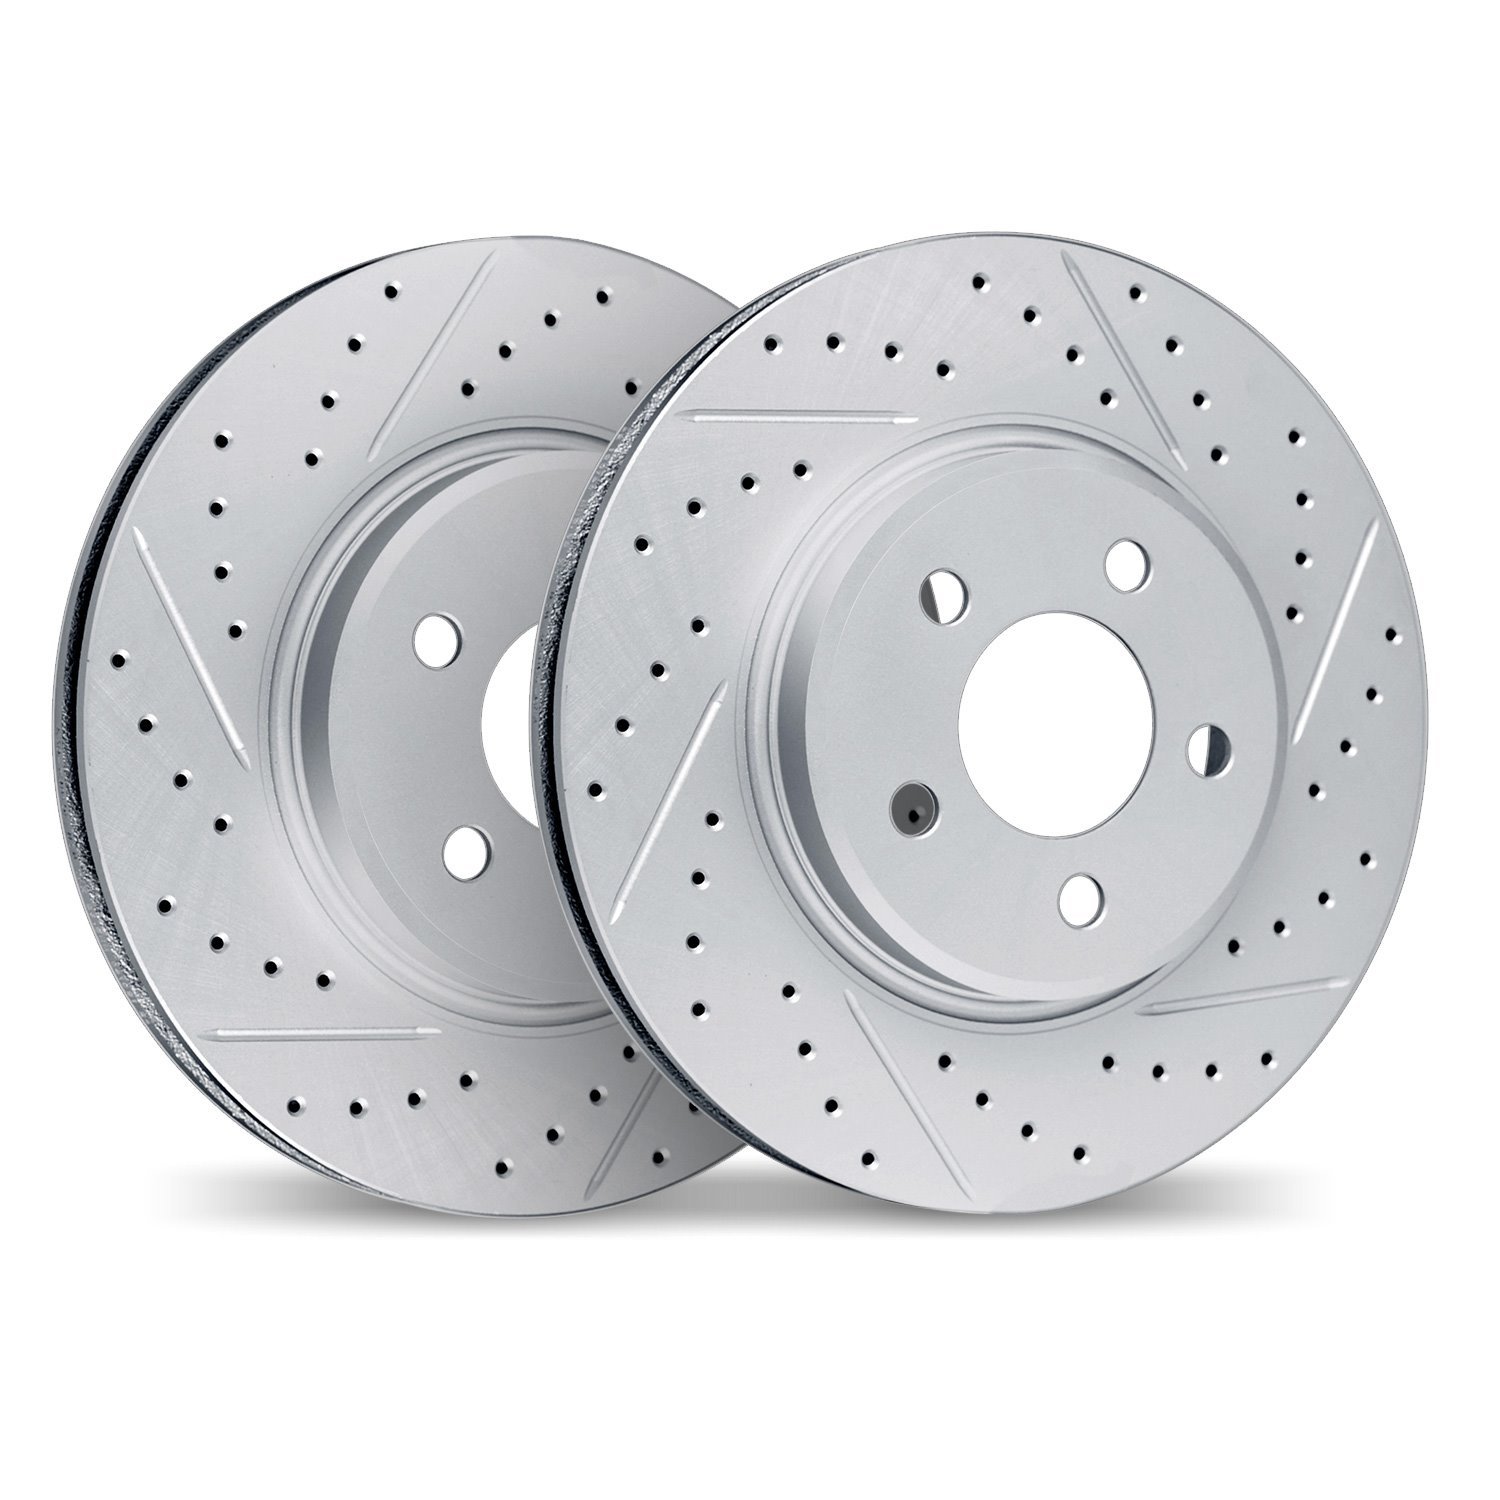 2002-11099 Geoperformance Drilled/Slotted Brake Rotors, Fits Select Land Rover, Position: Front